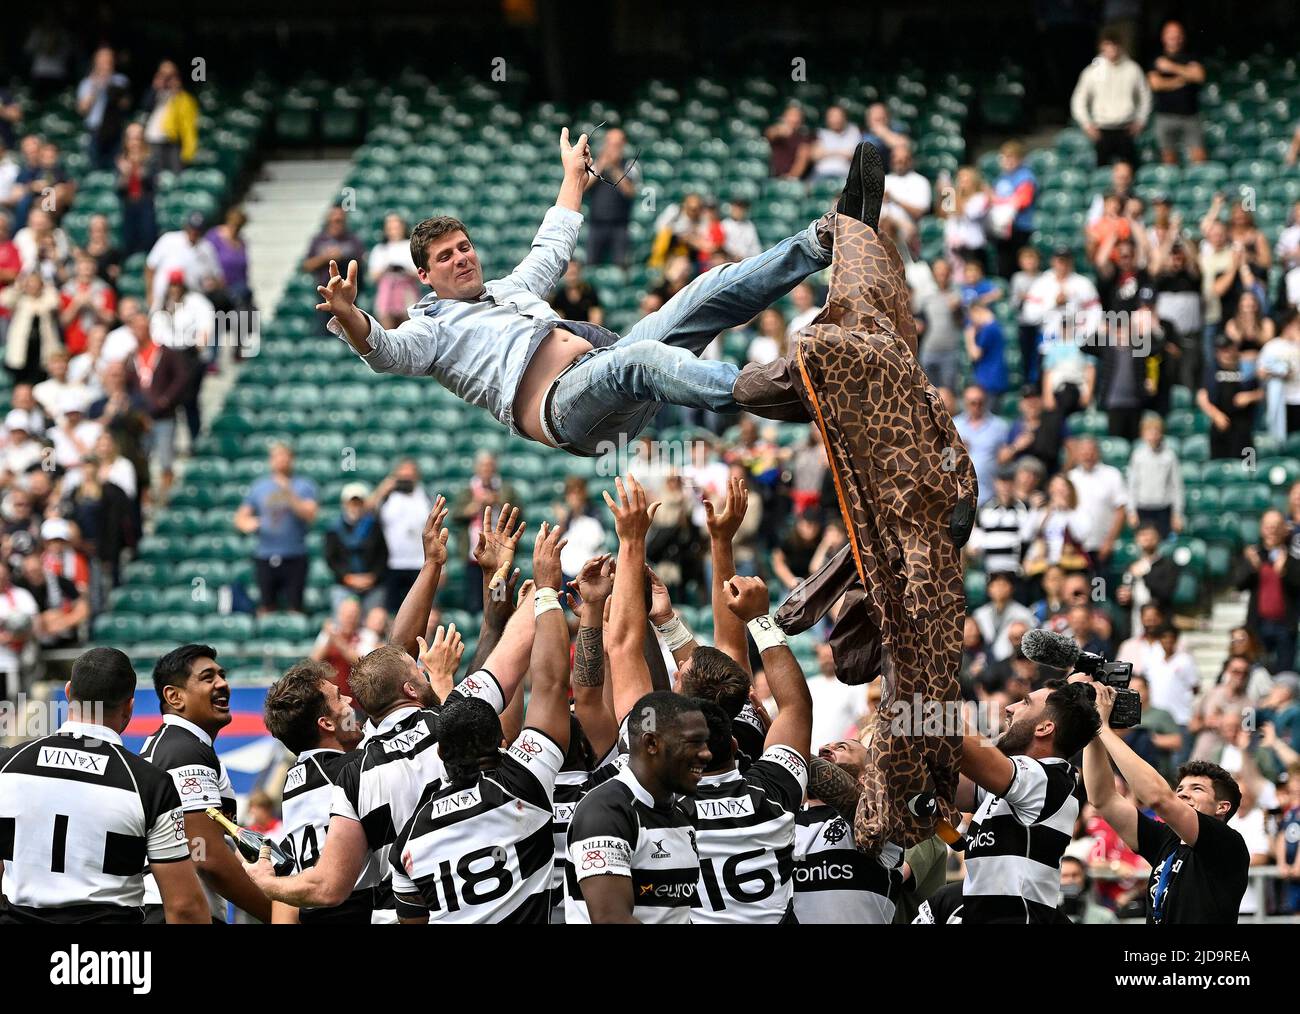 Twickenham, United Kingdom. 19th June, 2022. England V Barbarians. Twickenham Stadium. Twickenham. A pitch invader is thrown into the air by the Barbarians team at the end of the England V Barbarians rugby match. Credit: Sport In Pictures/Alamy Live News Stock Photo